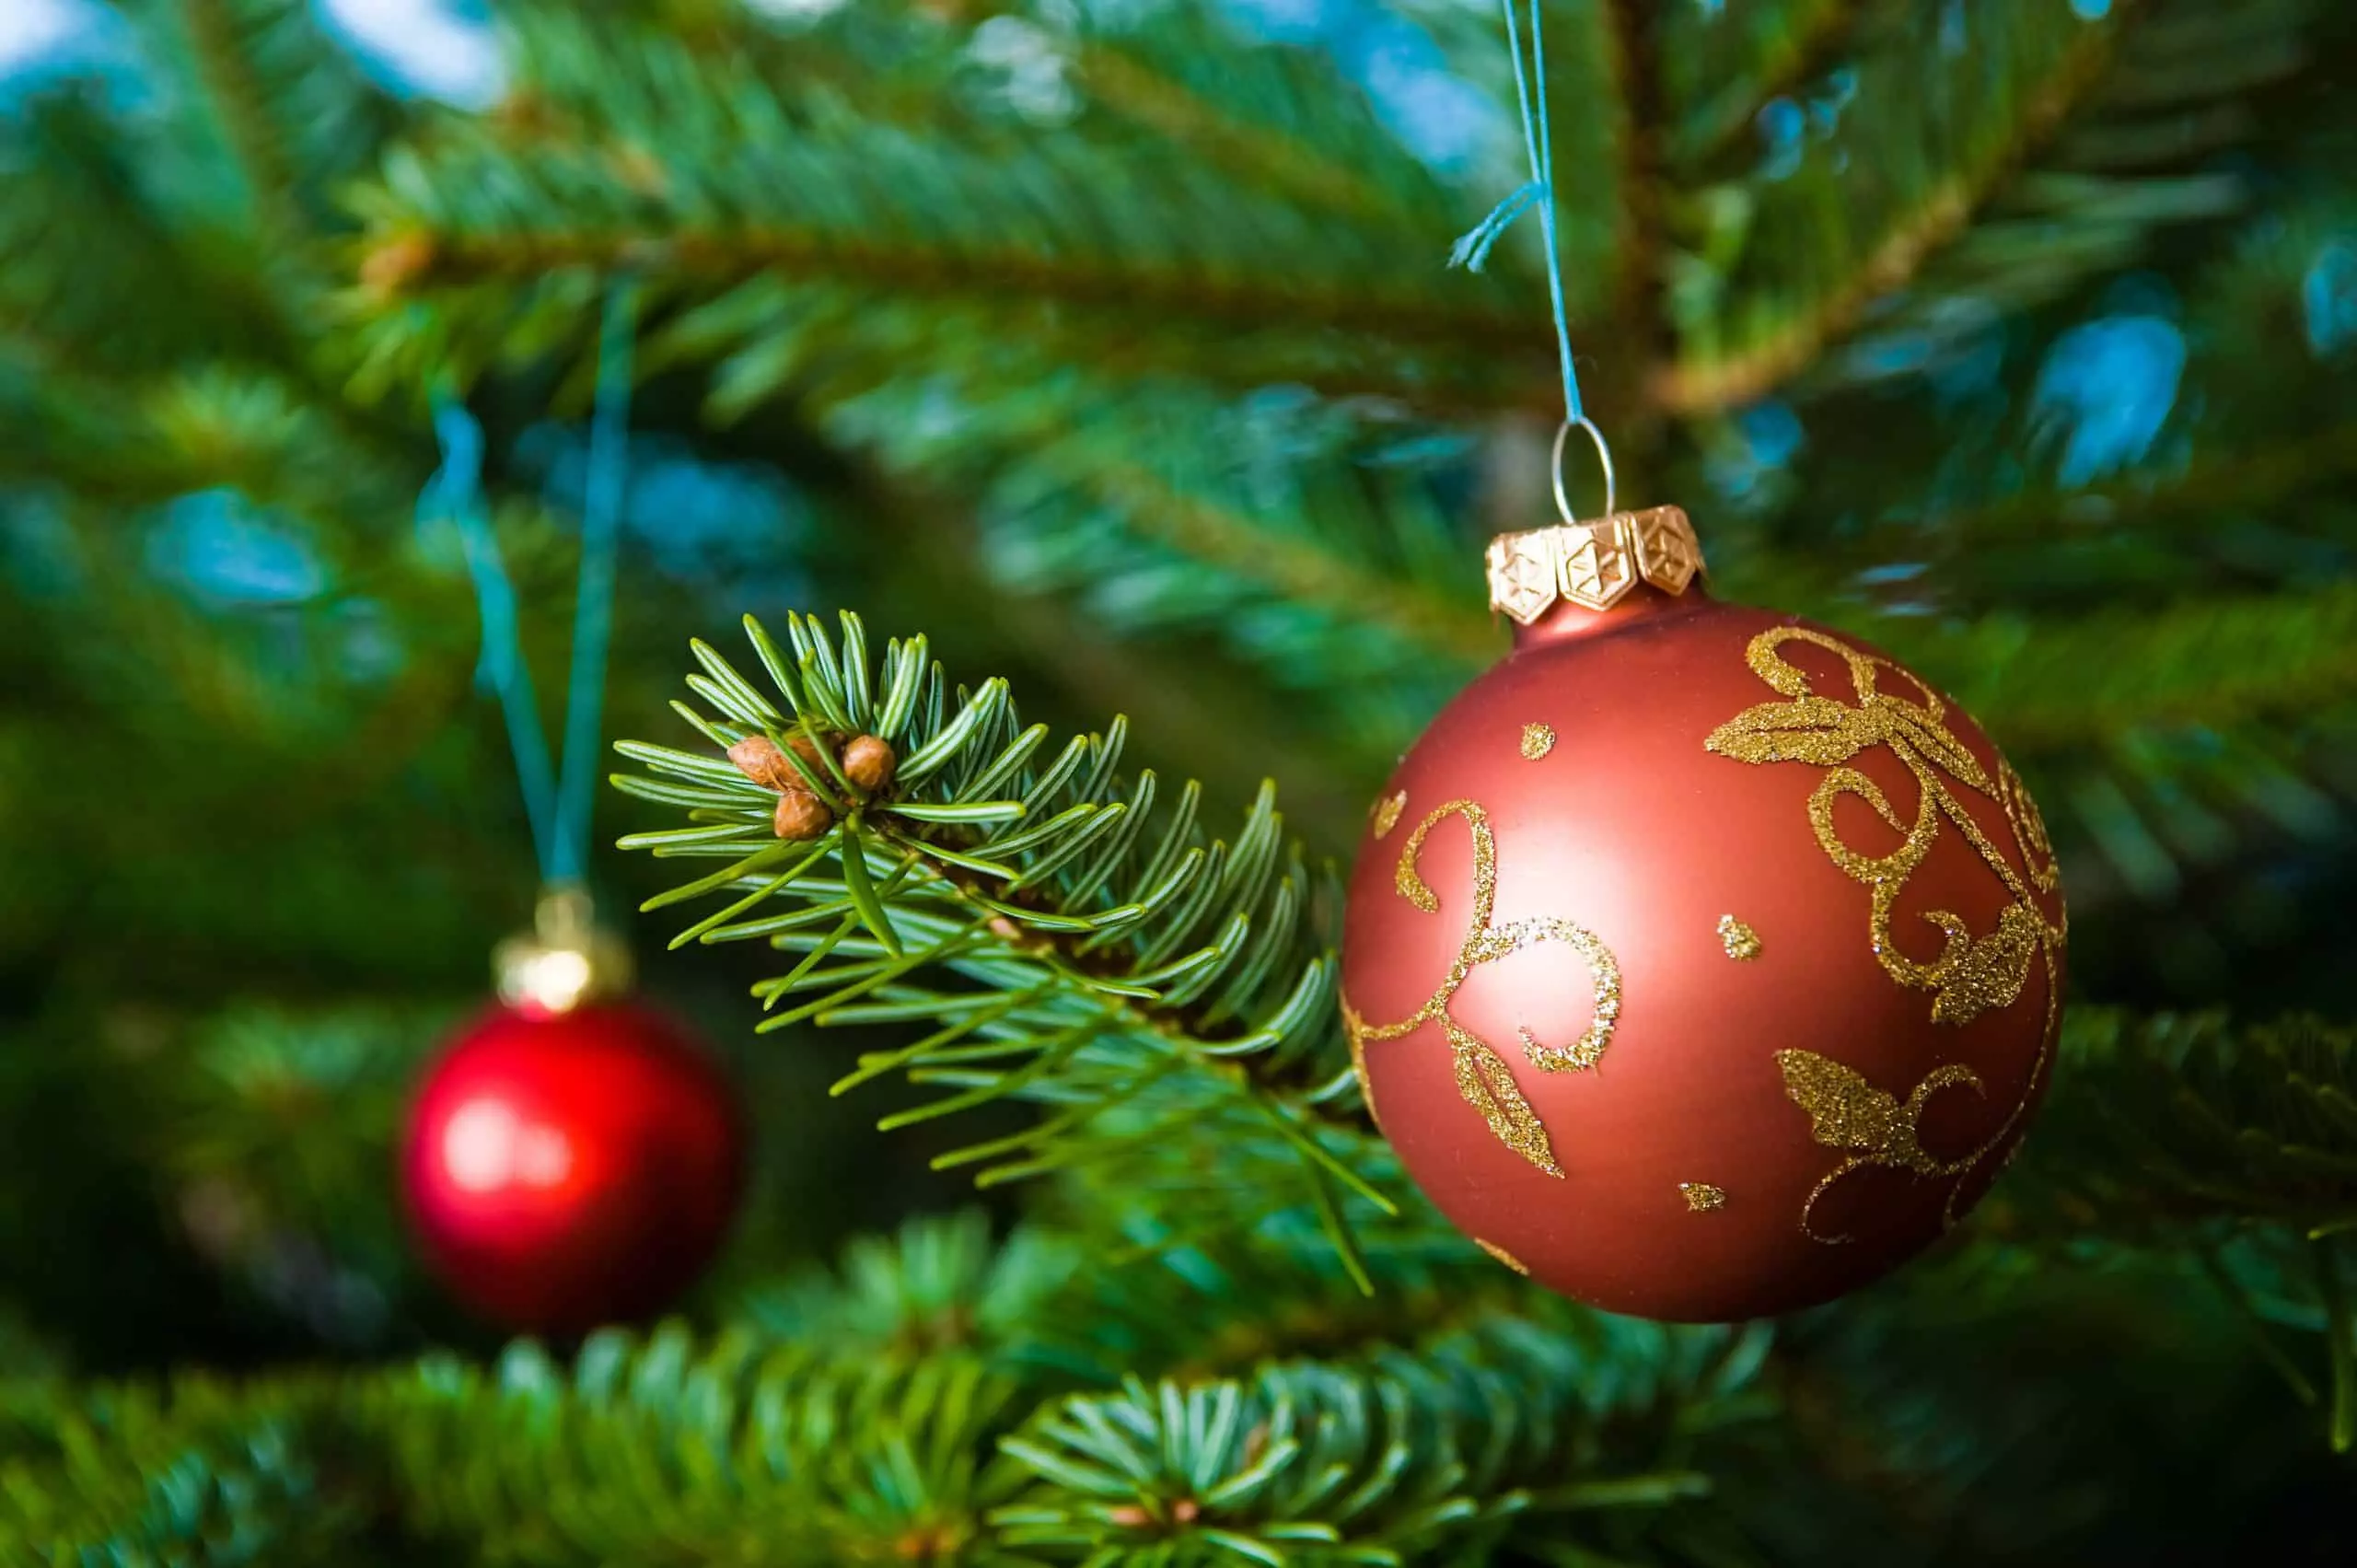 Two red Christmas ornaments on Christmas tree branch